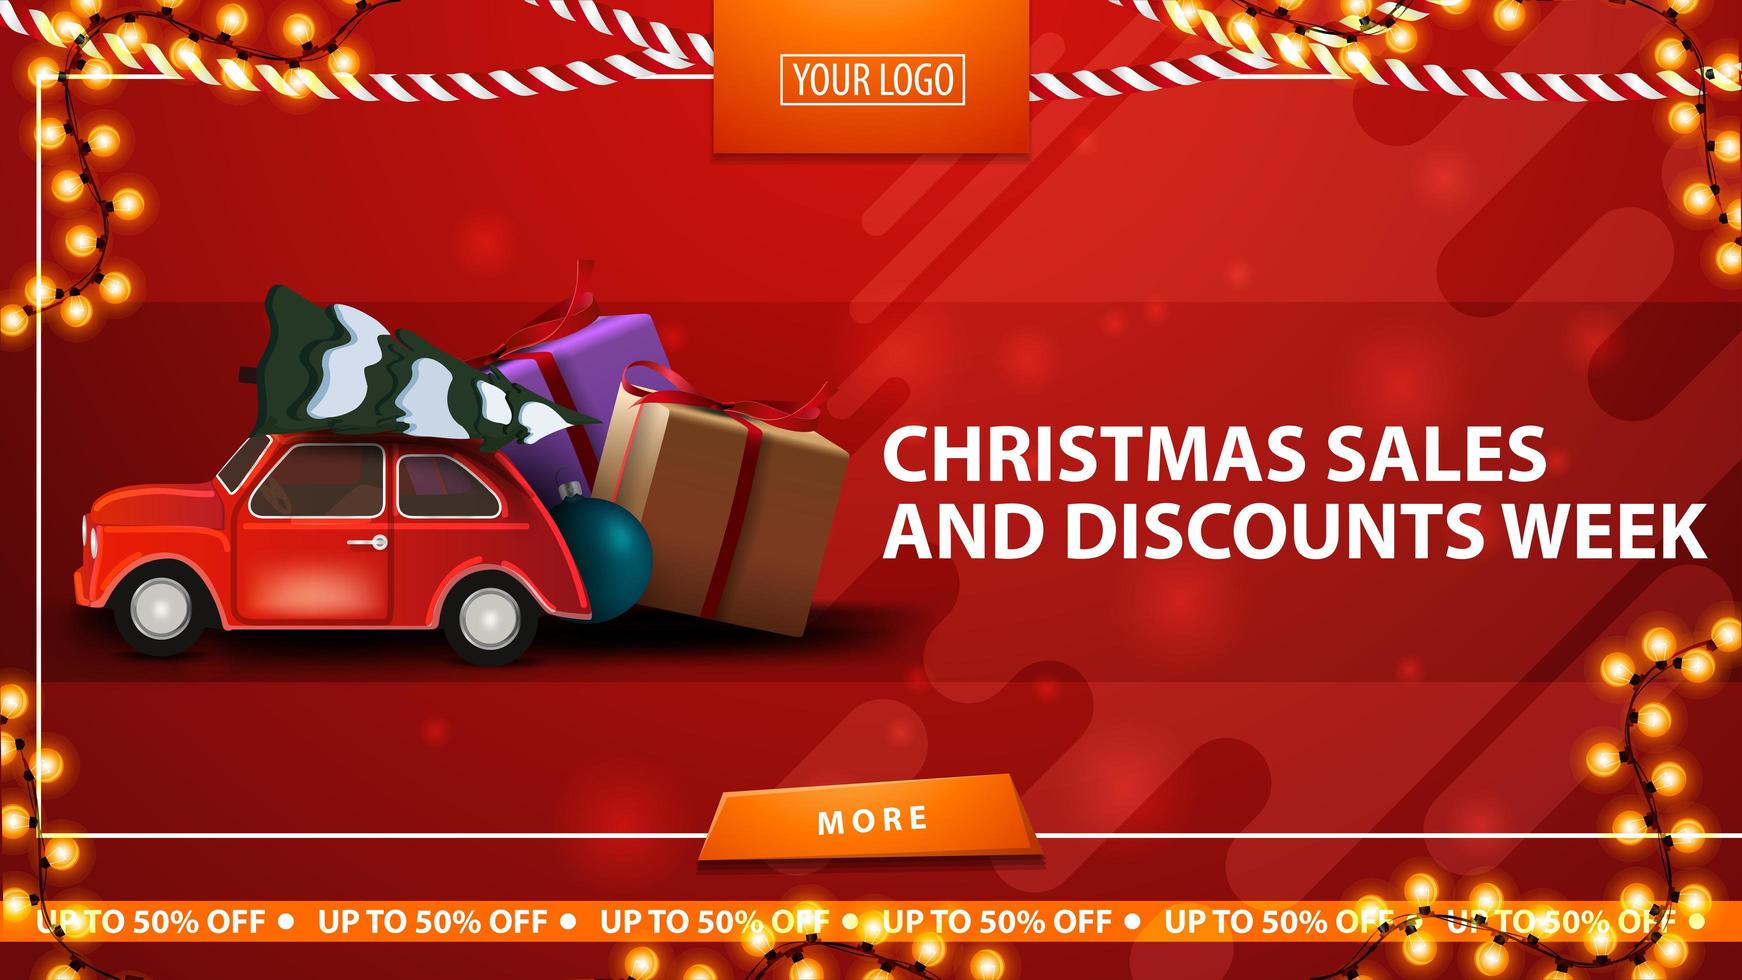 Christmas sales and discount week, red horizontal discount banner with button, frame garland and red vintage car carrying Christmas tree vector